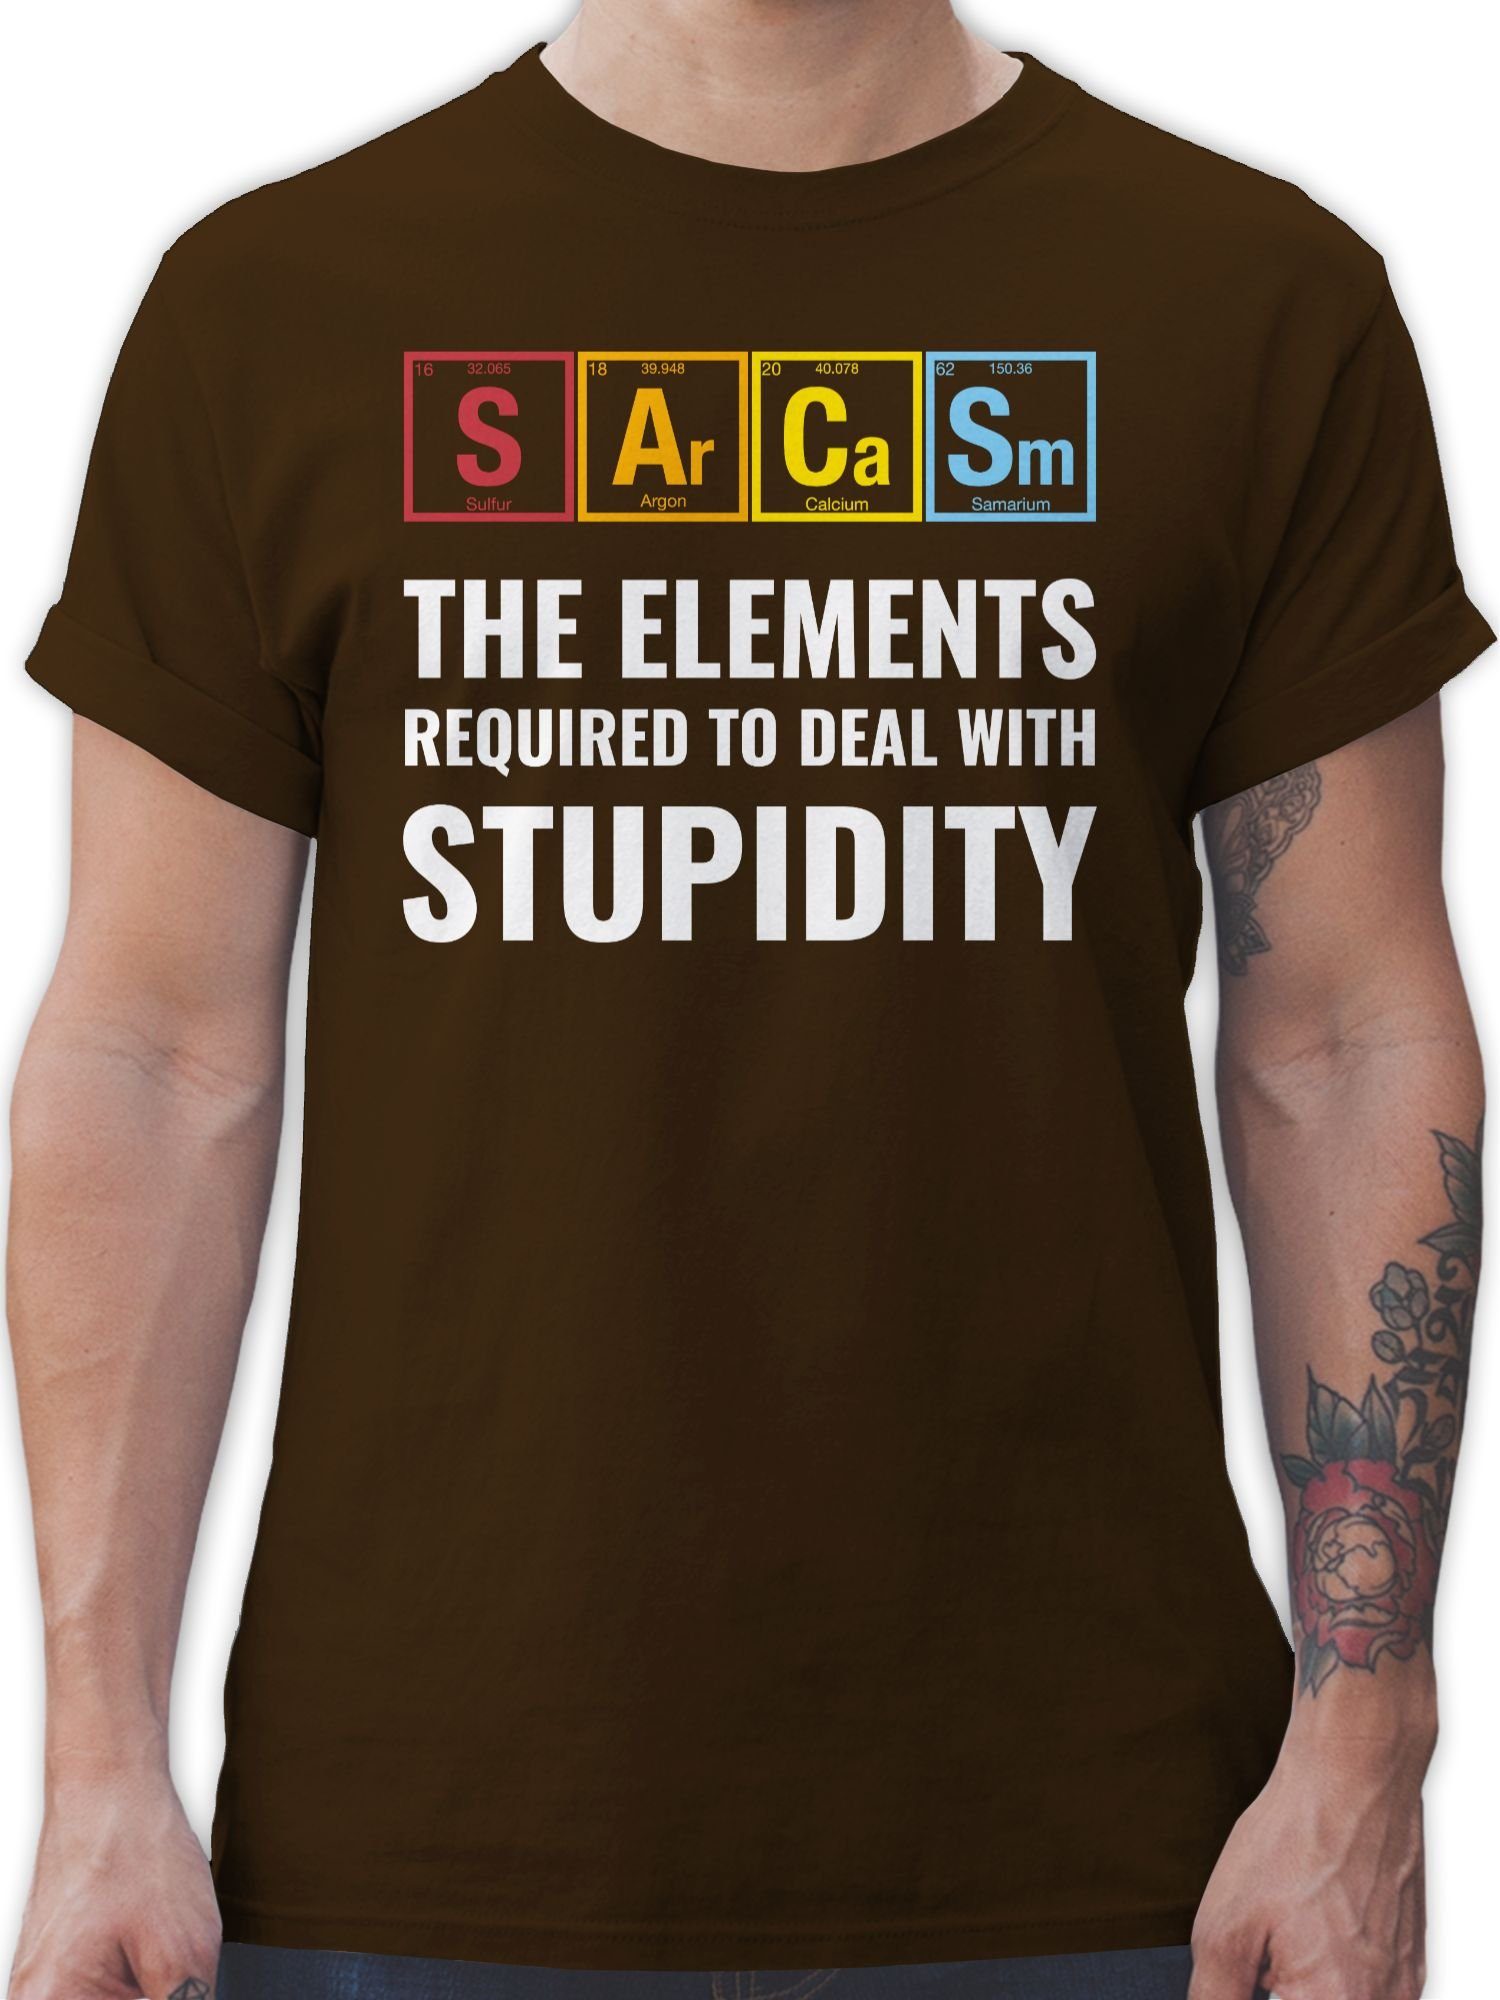 Shirtracer T-Shirt Sarcasm - the elements required to deal with stupidity Nerd Geschenke 02 Braun